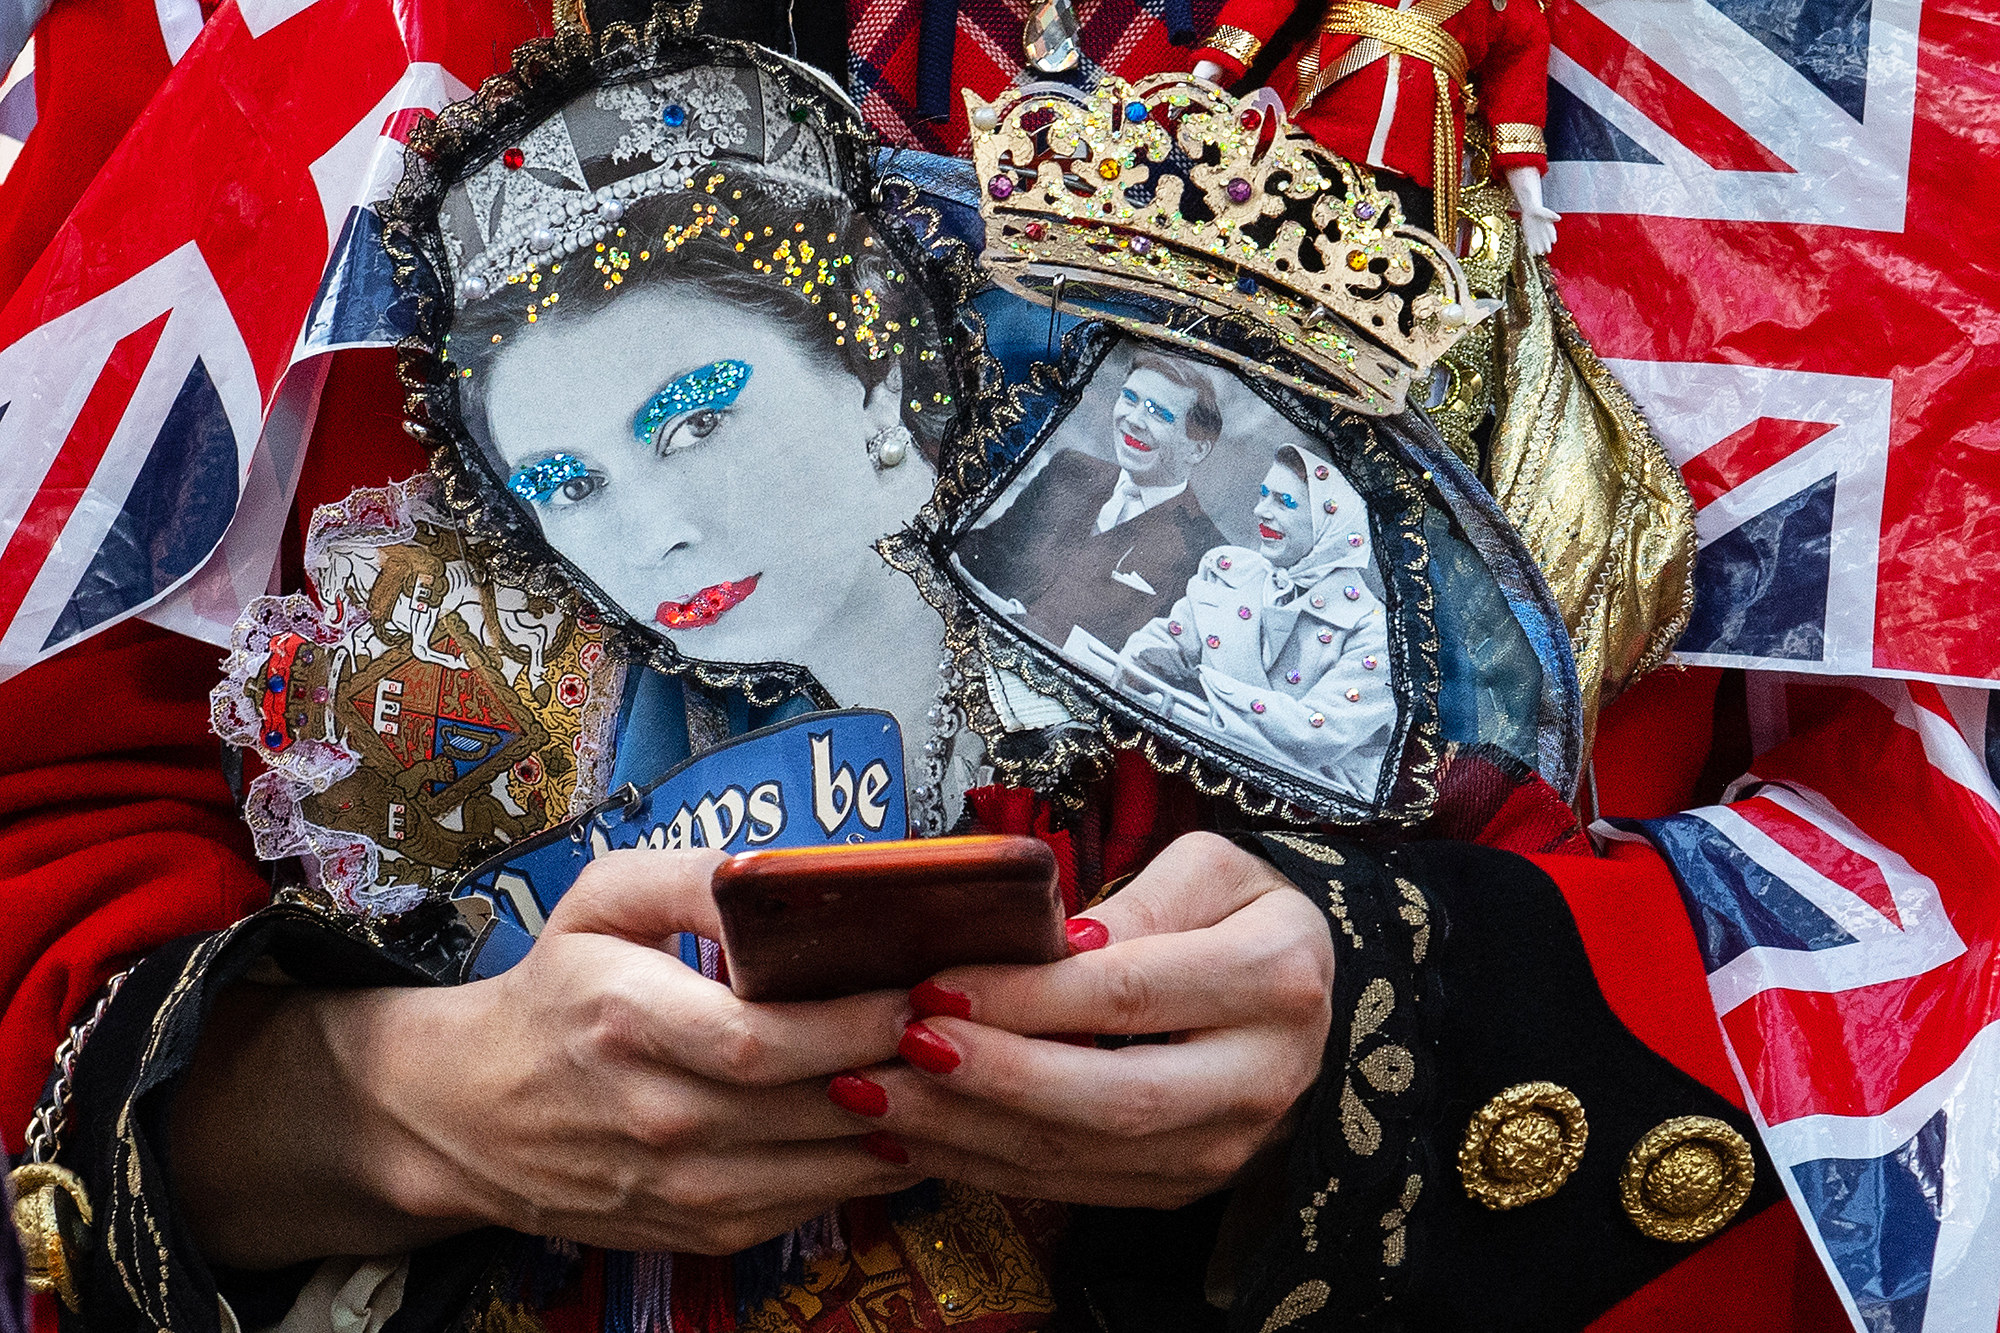 Person holding a cellphone wears clothing that includes bedazzled images of the Queen&#x27;s face